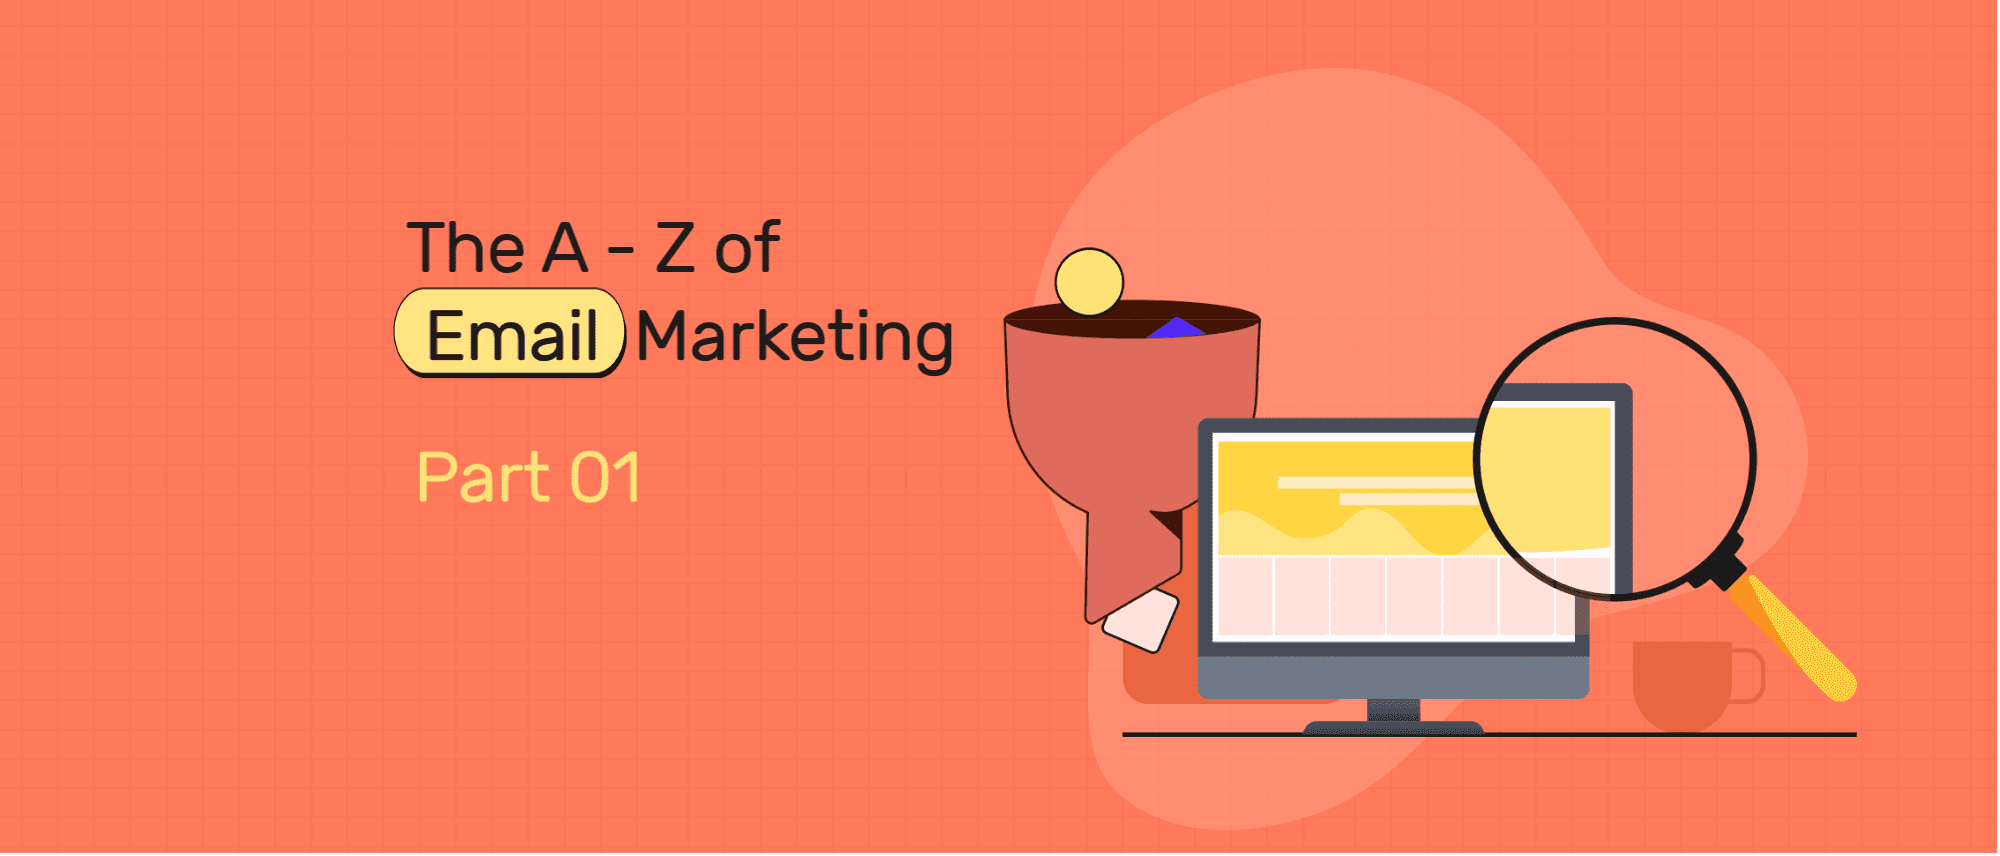 The A-Z of Email Marketing - Part 1